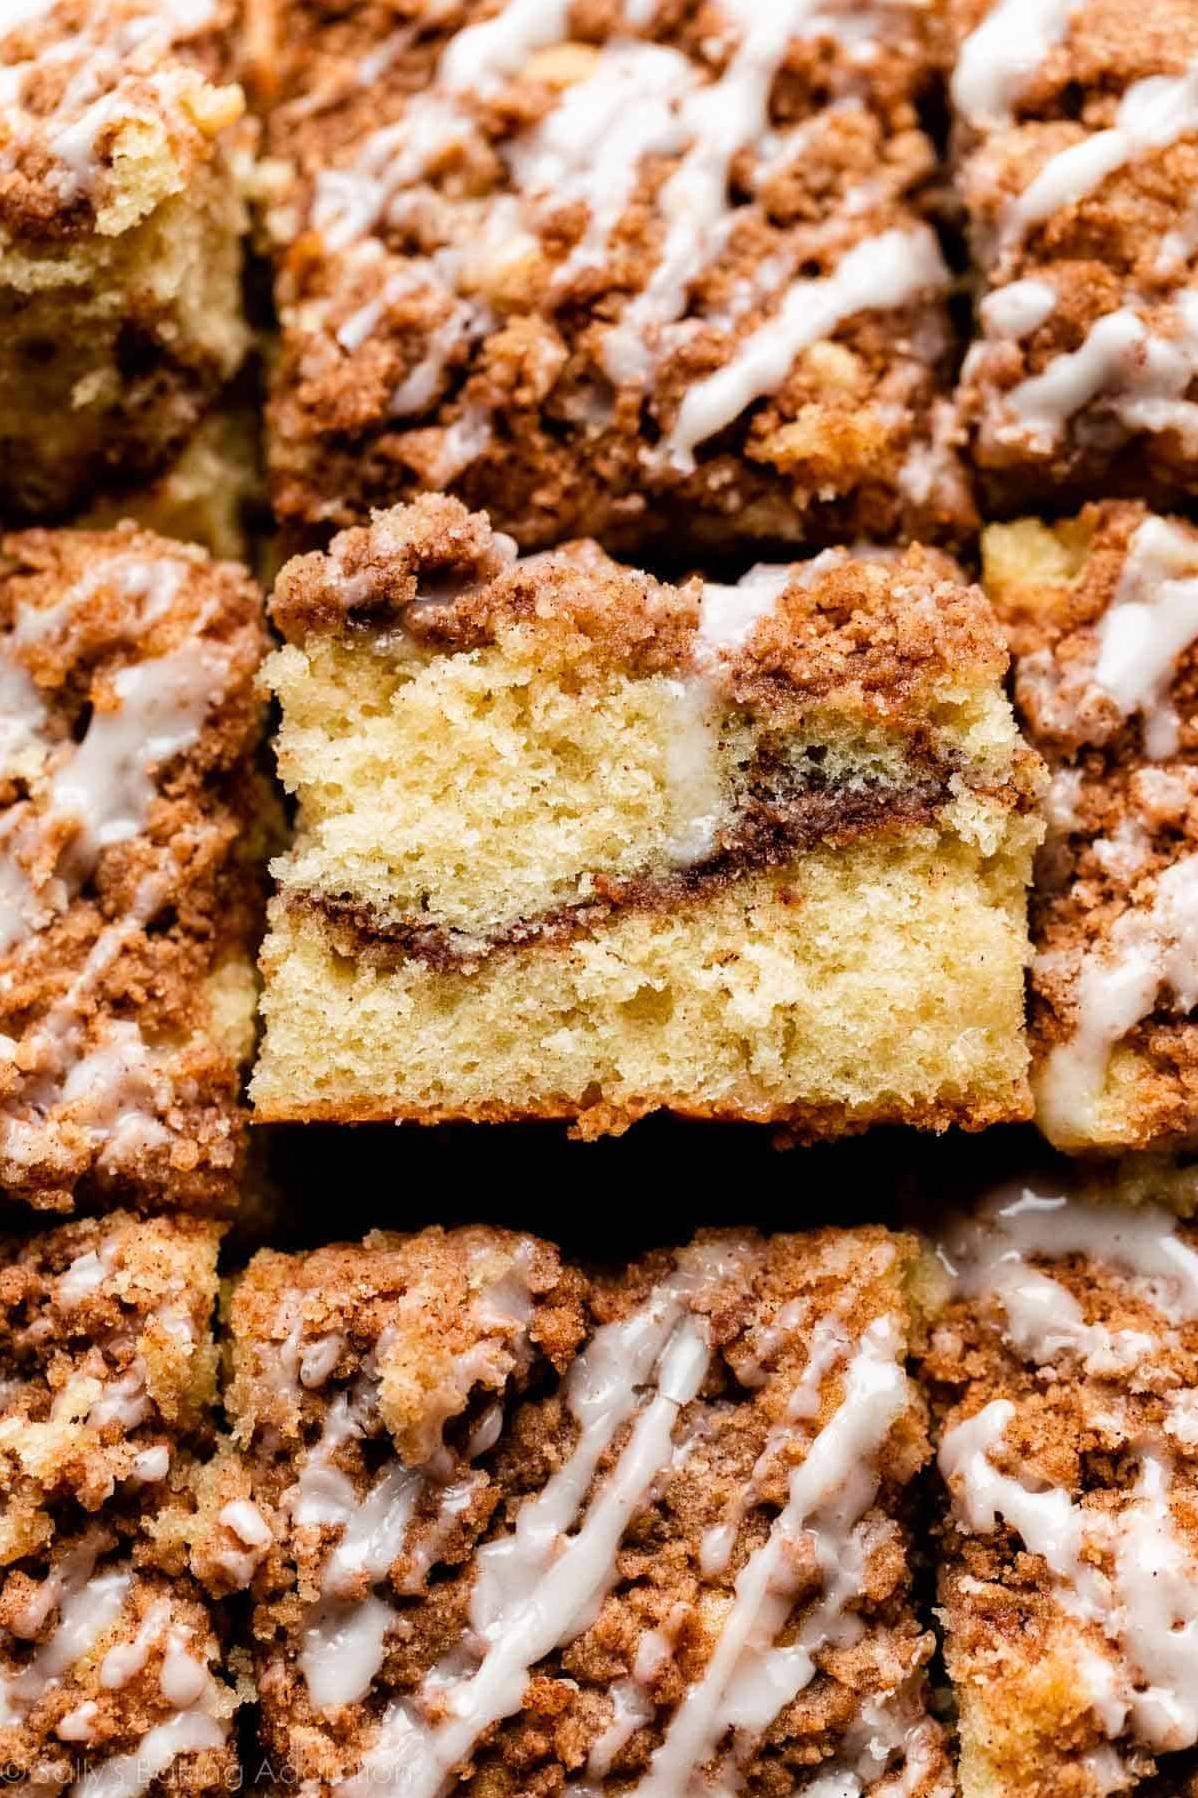  Share a slice of love with your family and friends with this amazing cinnamon coffee cake.